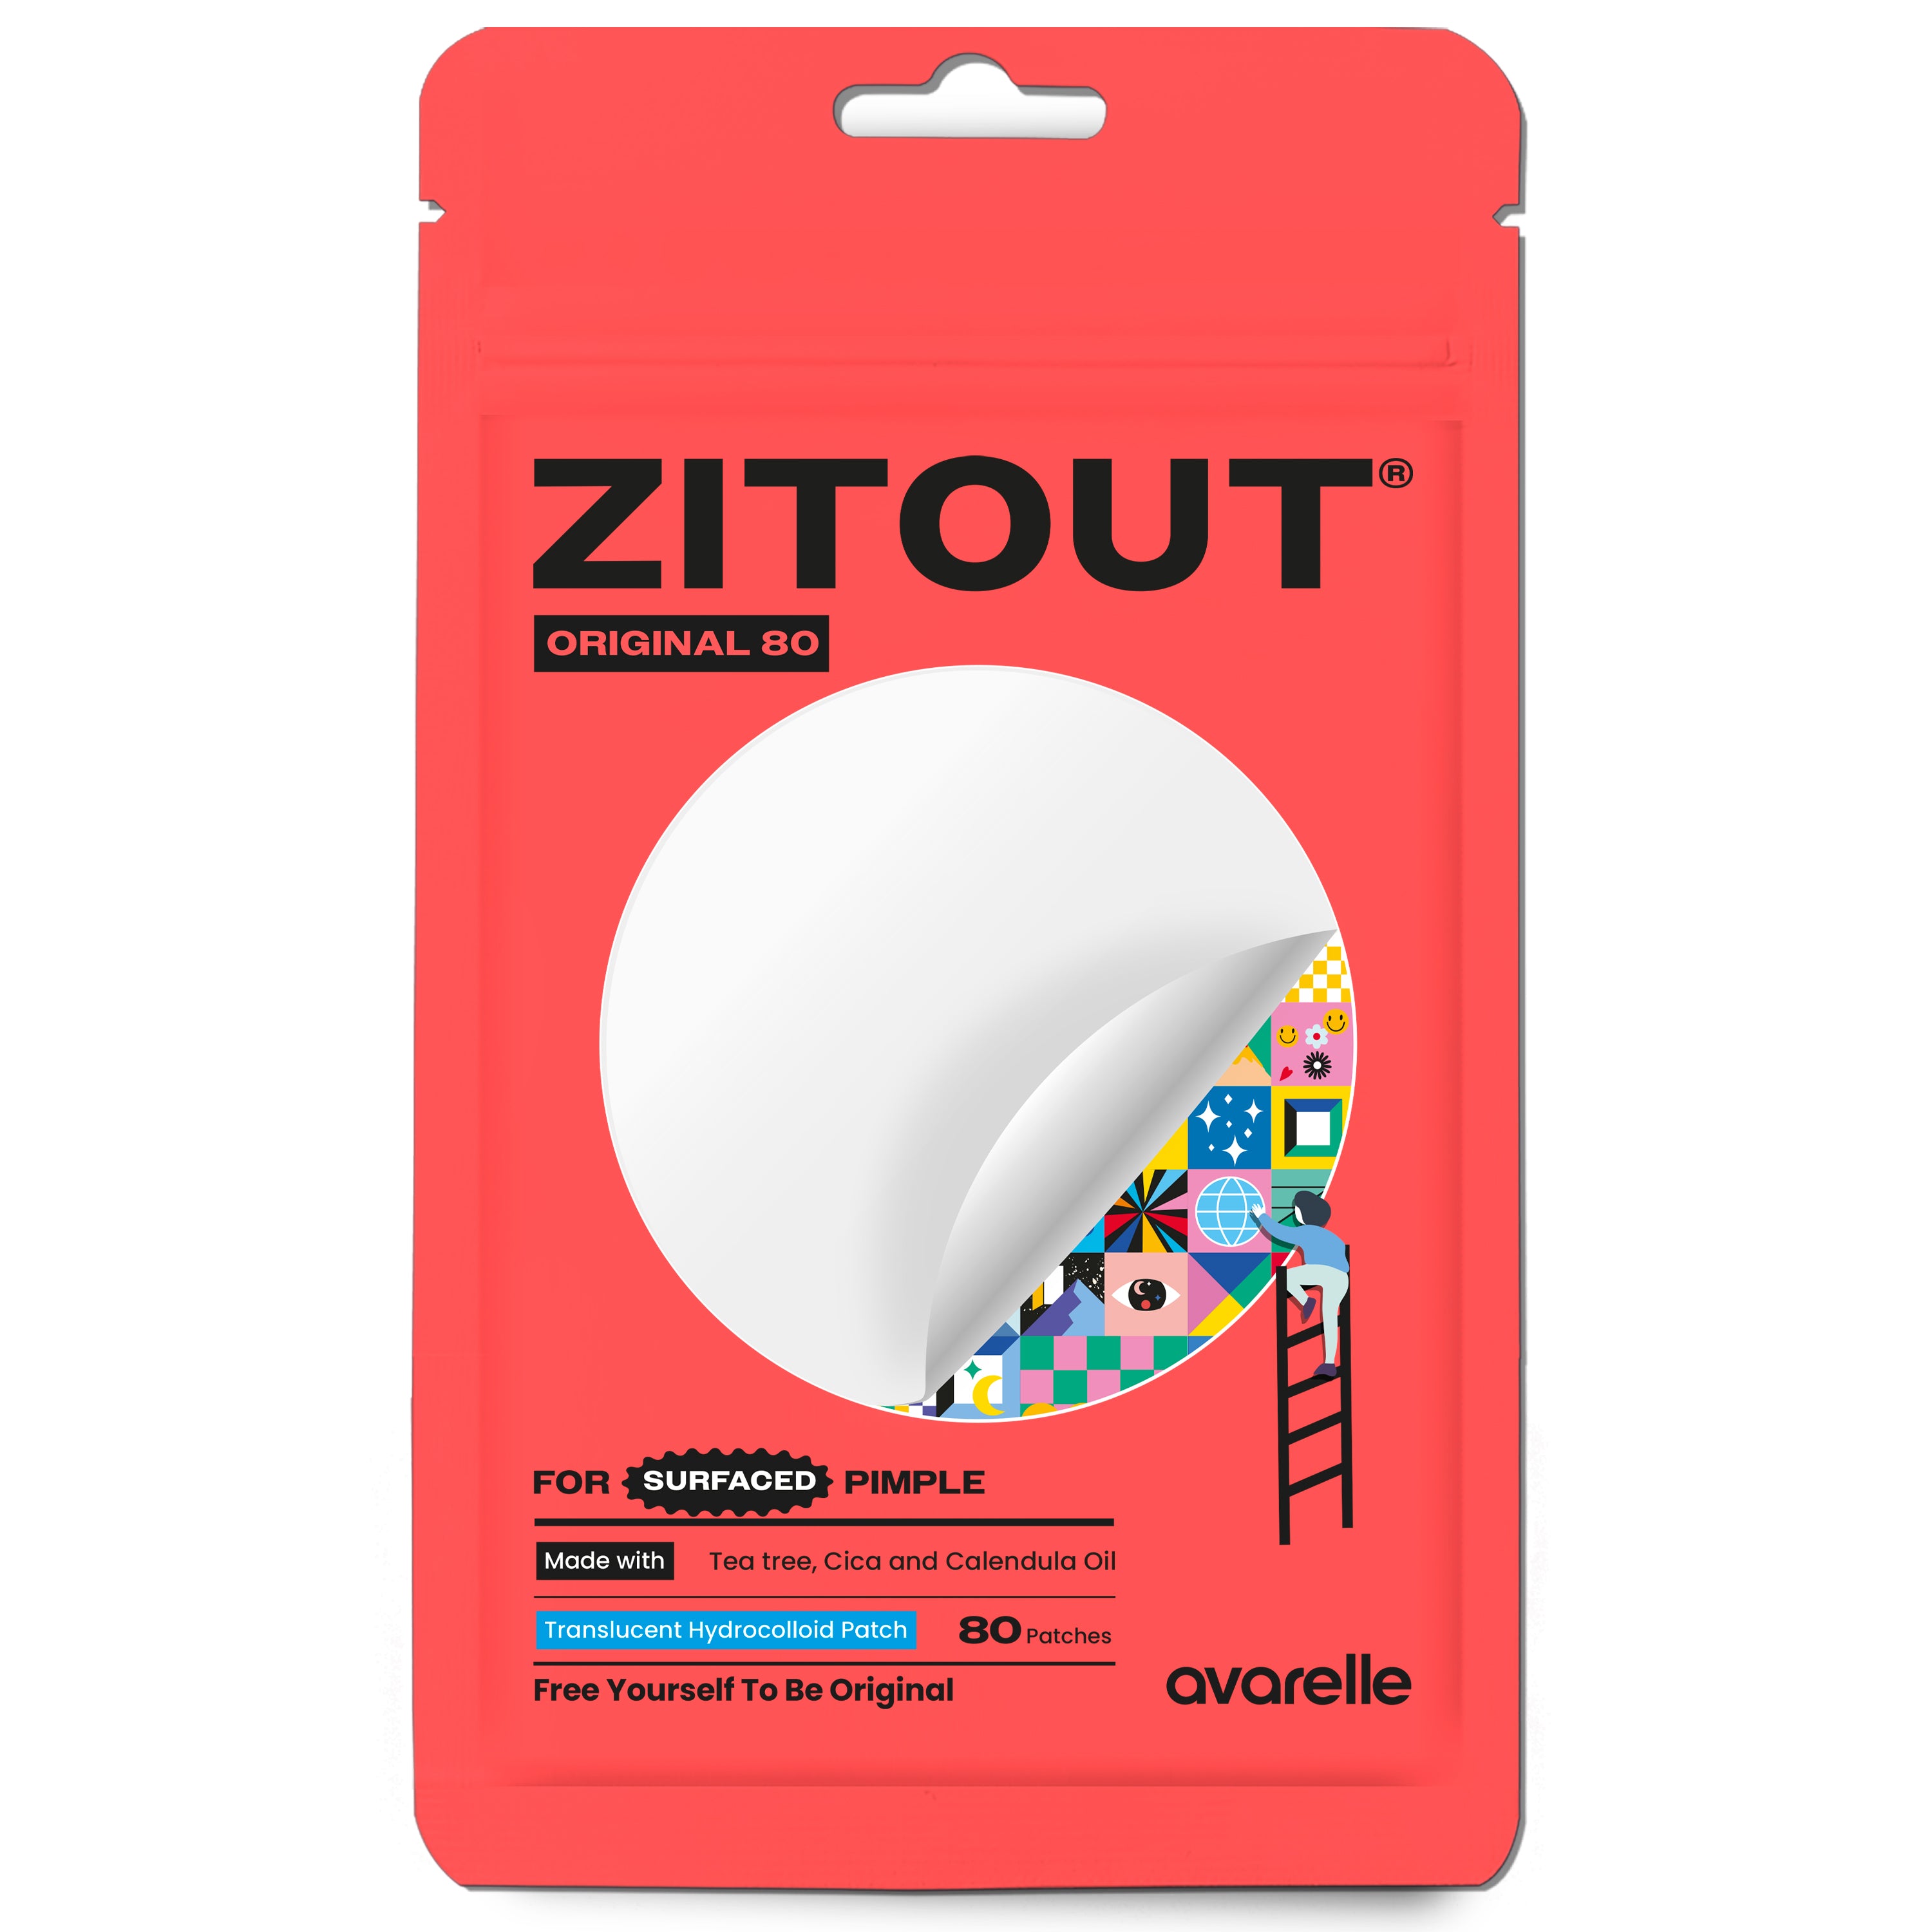 Product packaging for Avarelle's ZitOut Original 80 acne patch with ingredients such as tea tree, cica, and Calendula oil.